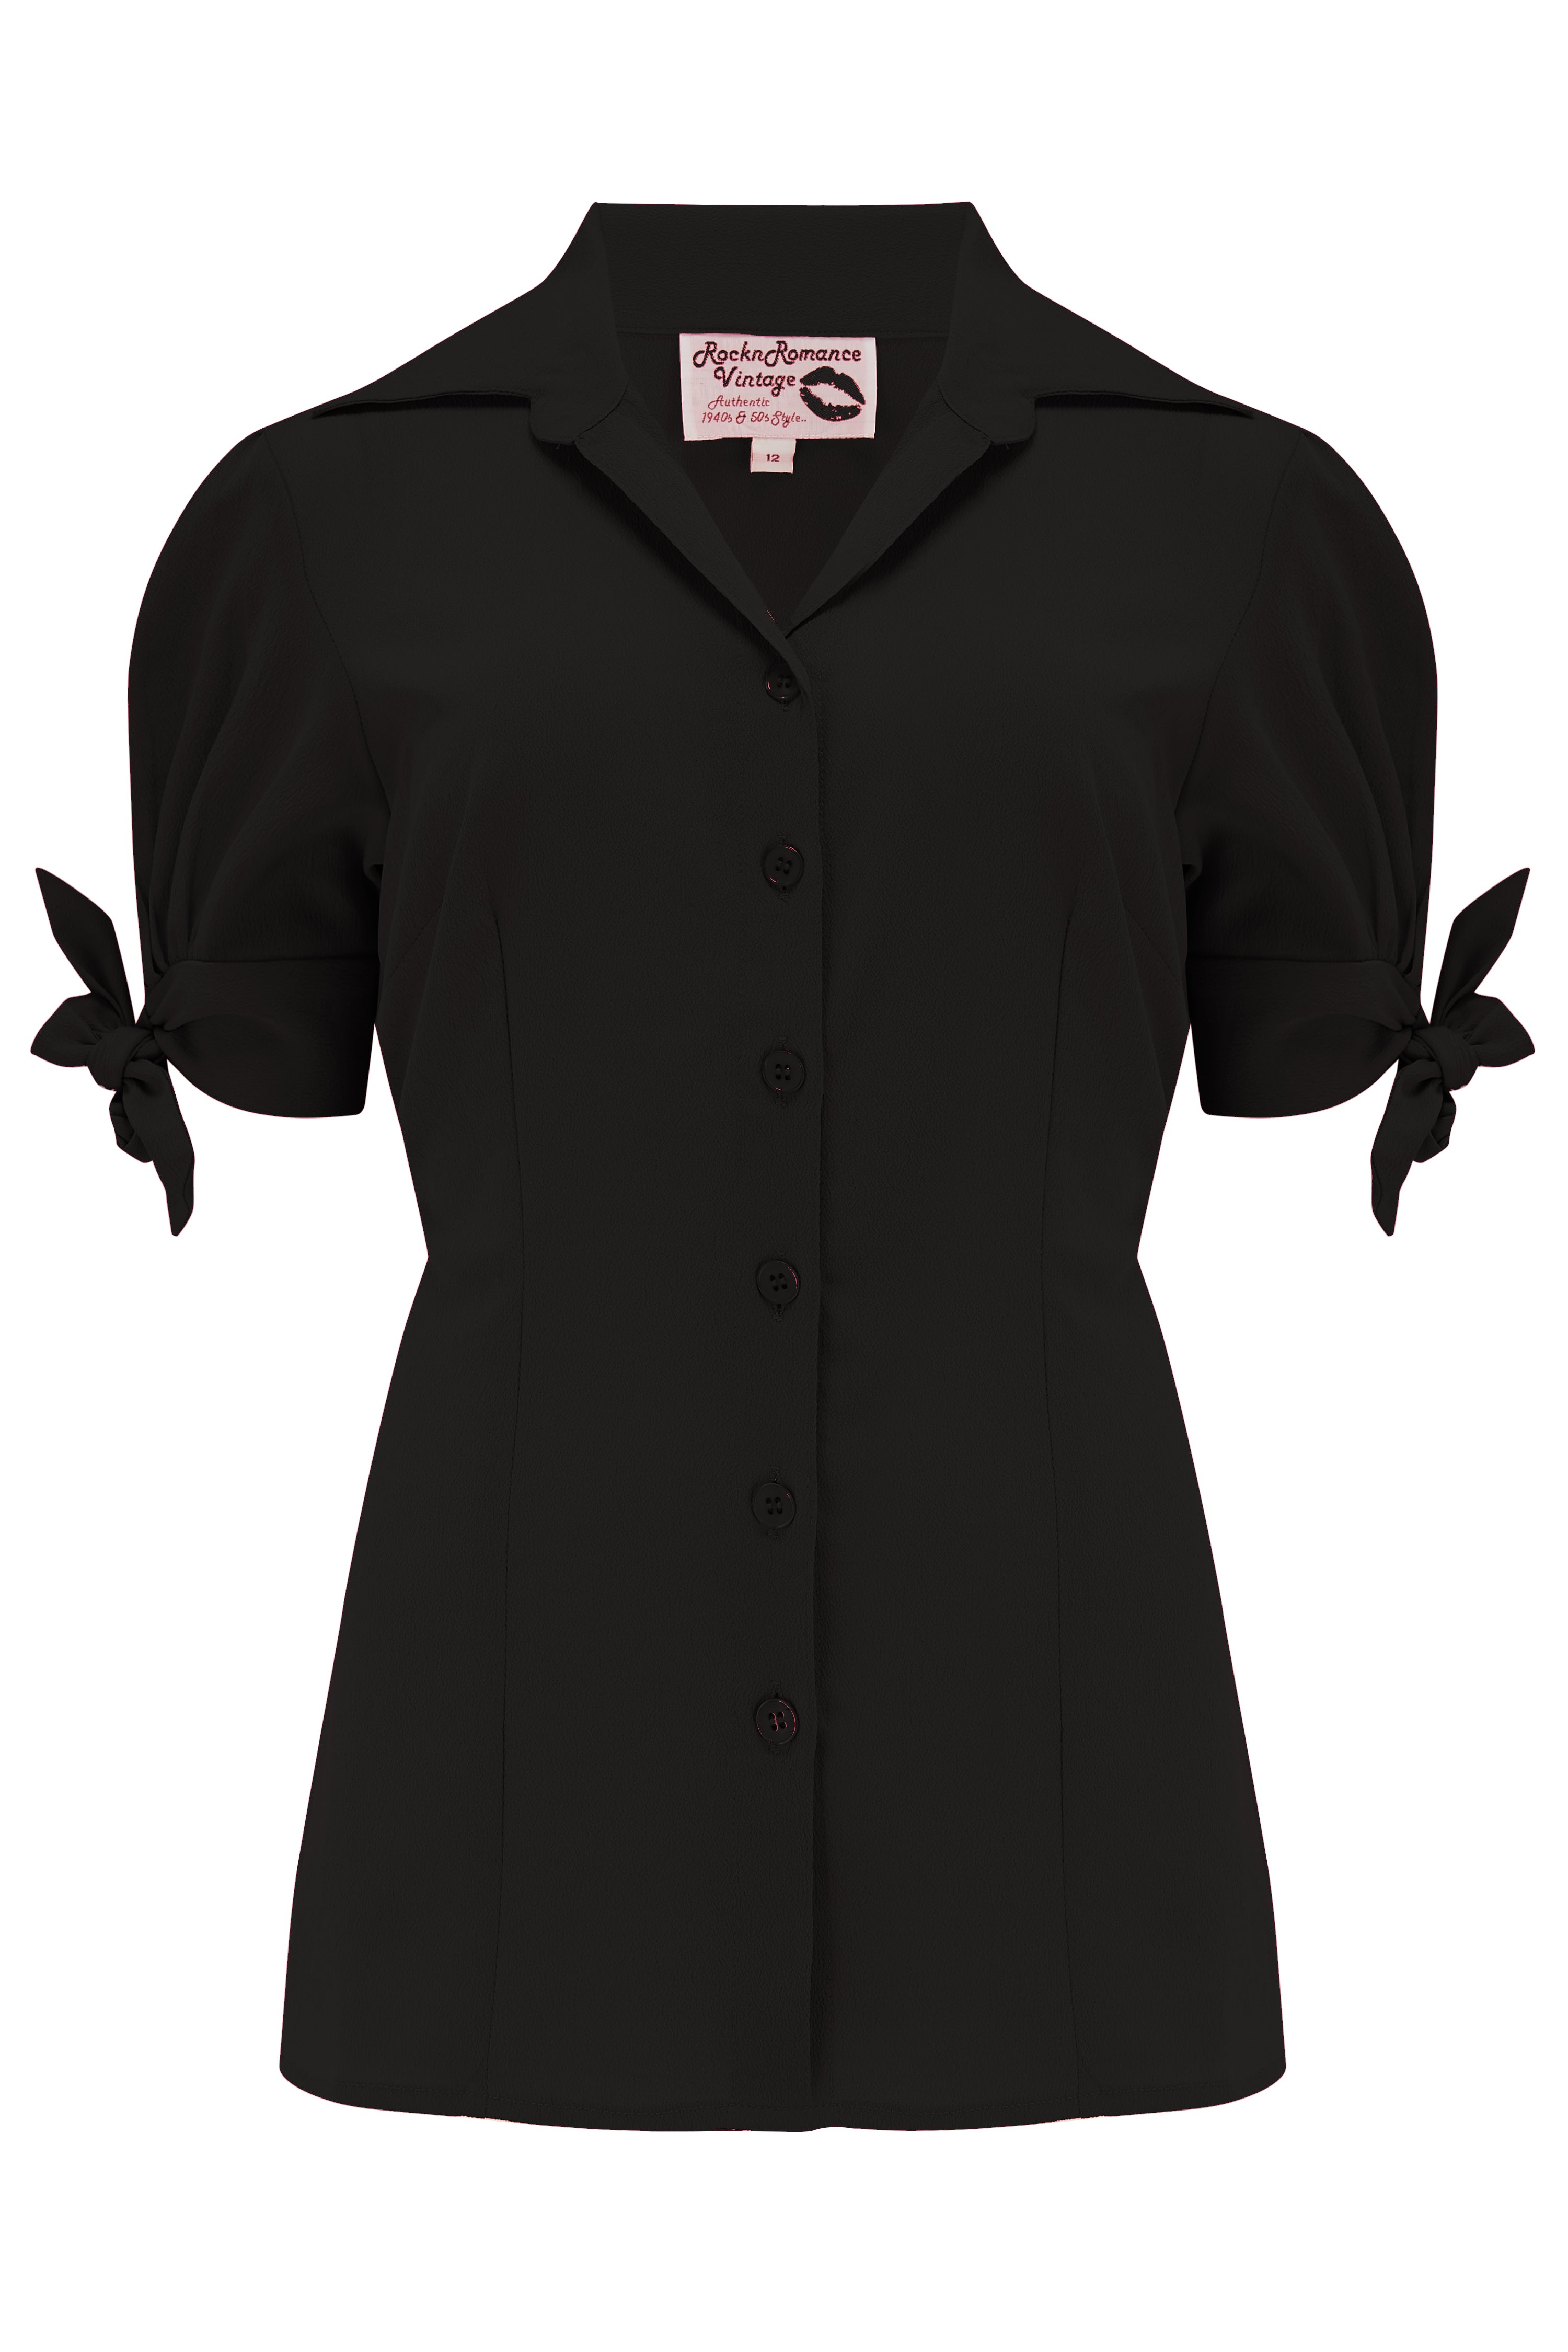 The "Jane" Blouse in Solid Black, True & Authentic 1950s Vintage Style product